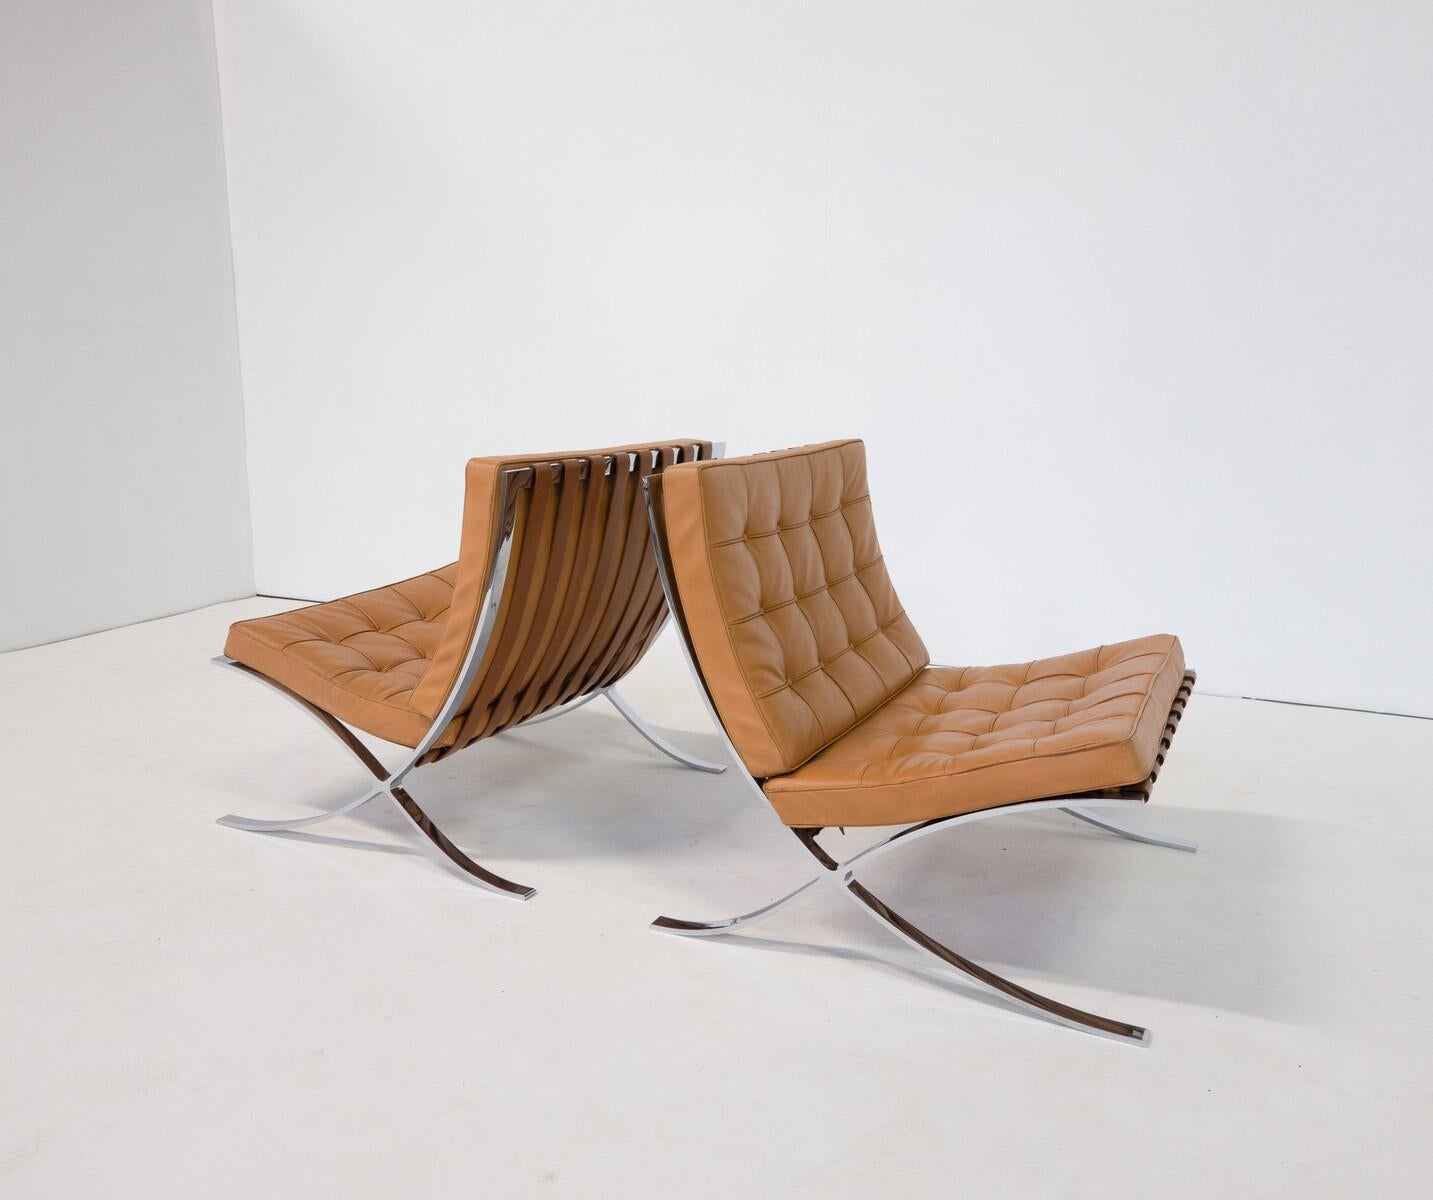 Pair of Cognac Leather Barcelona Chairs by Mies Van Der Rohe for Knoll, 1960s For Sale 6